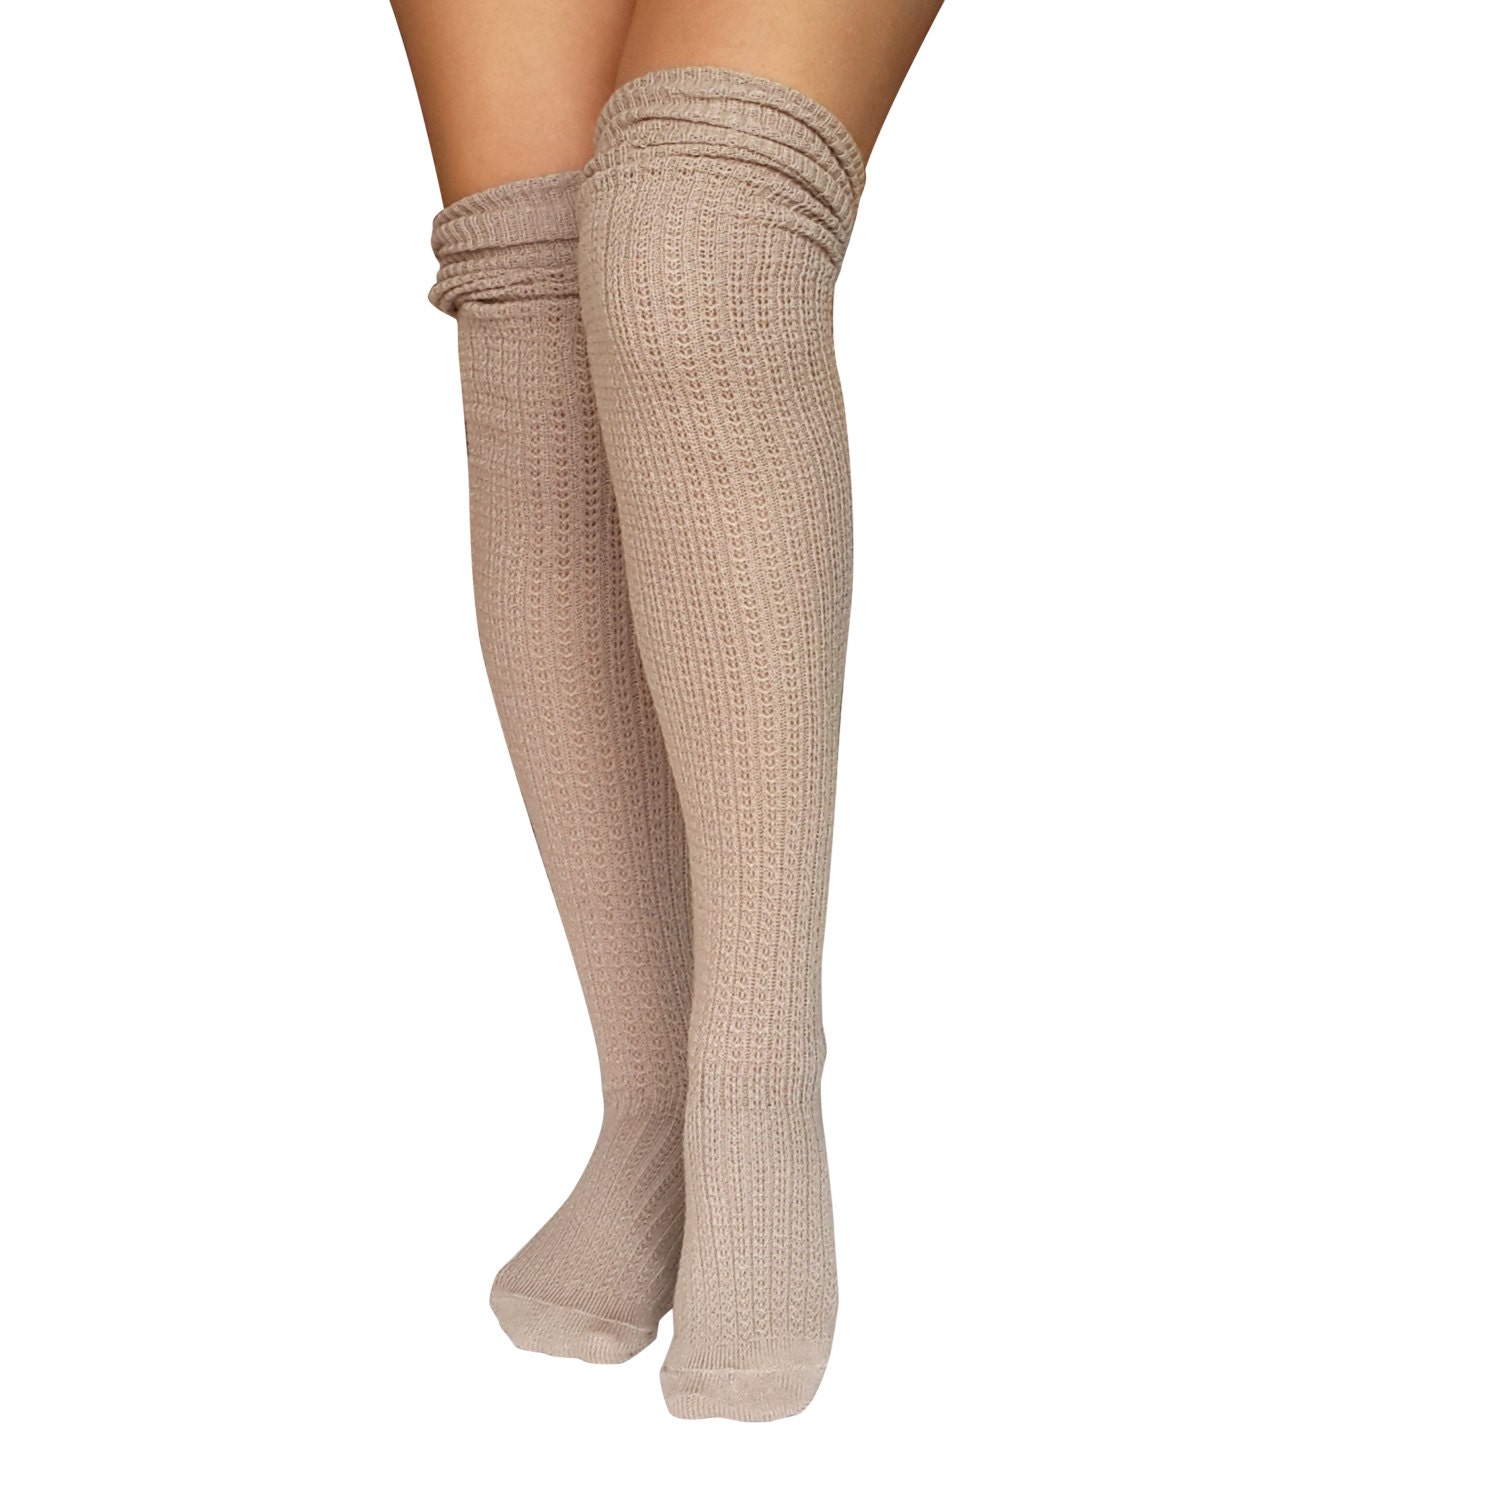 WOMEN and GIRLS SOCK Beige long socks-Knitted Black Boot by AGORAA